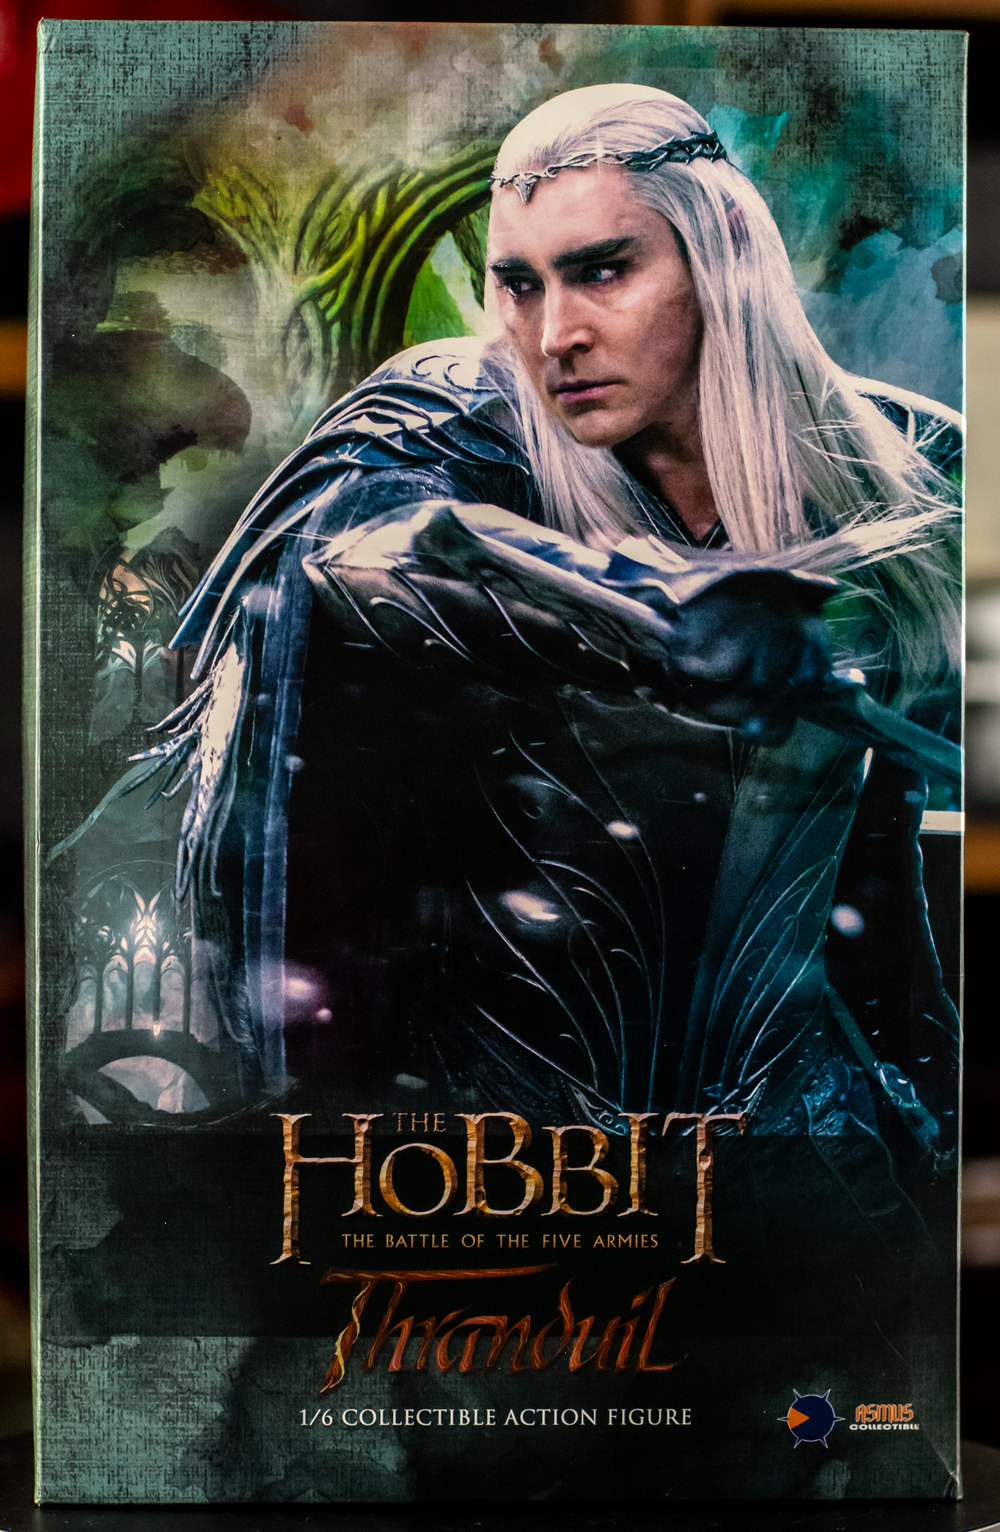 The Hobbit: The Battle Of The Five Armies "Thranduil"